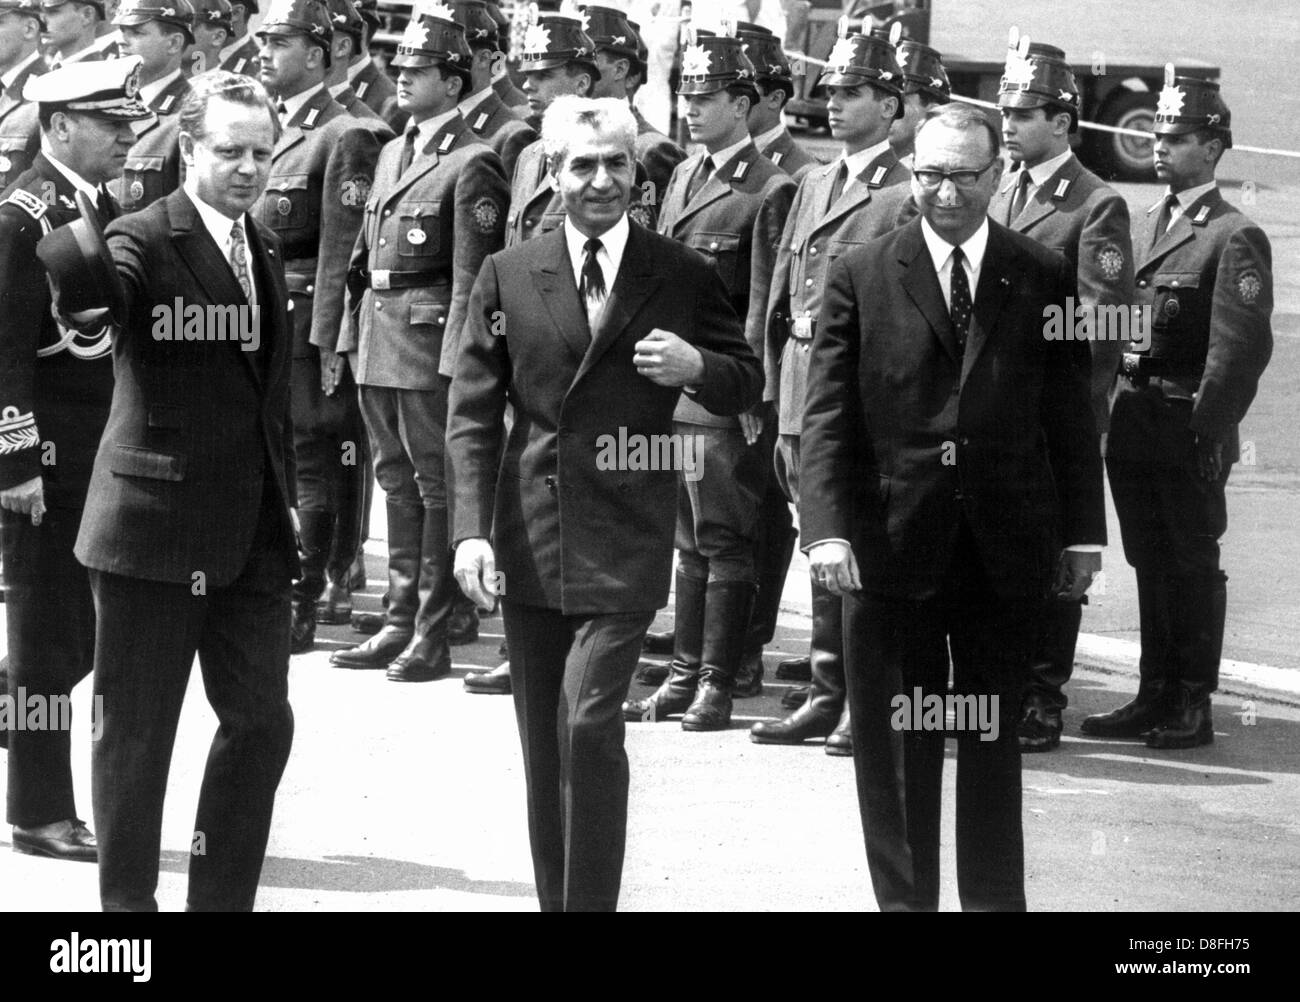 Iranian Shah Reza Mohammed Pahlavi (m), governing mayor of Berlin Heinrich Albertz (l) and chief of protocol Ruprecht Rauch (l) walk past an honorary formation of the police of Berlin on the 2nd of June in 1967 in airport of Tempelhof in Berlin. The visit of the Shah caused massive protests, during which student Benno Ohnesorg lost his life. Stock Photo